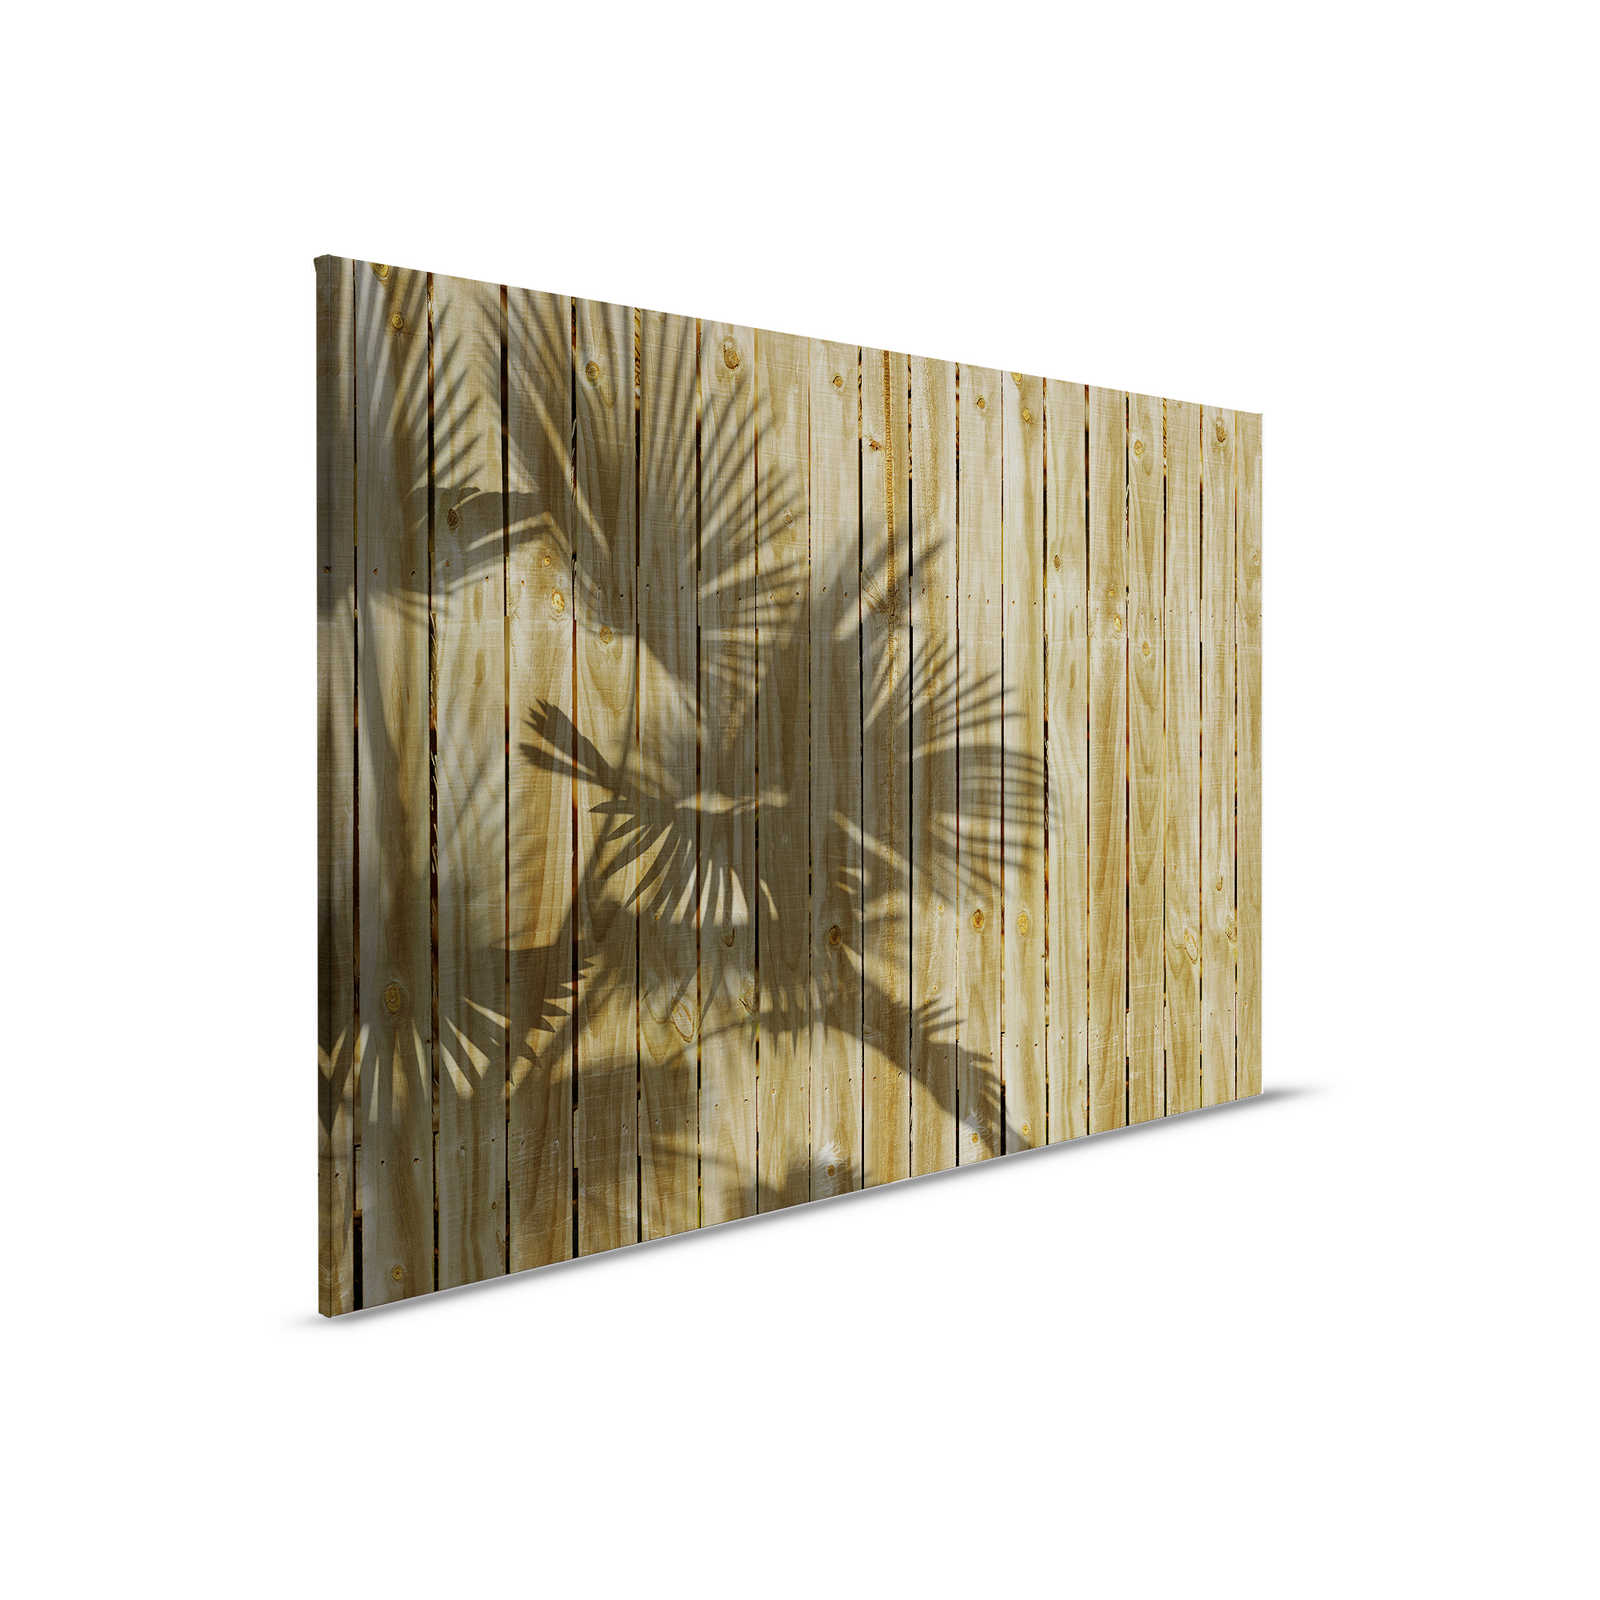         Canvas painting with wood look and palm leaf shade - 0.90 m x 0.60 m
    